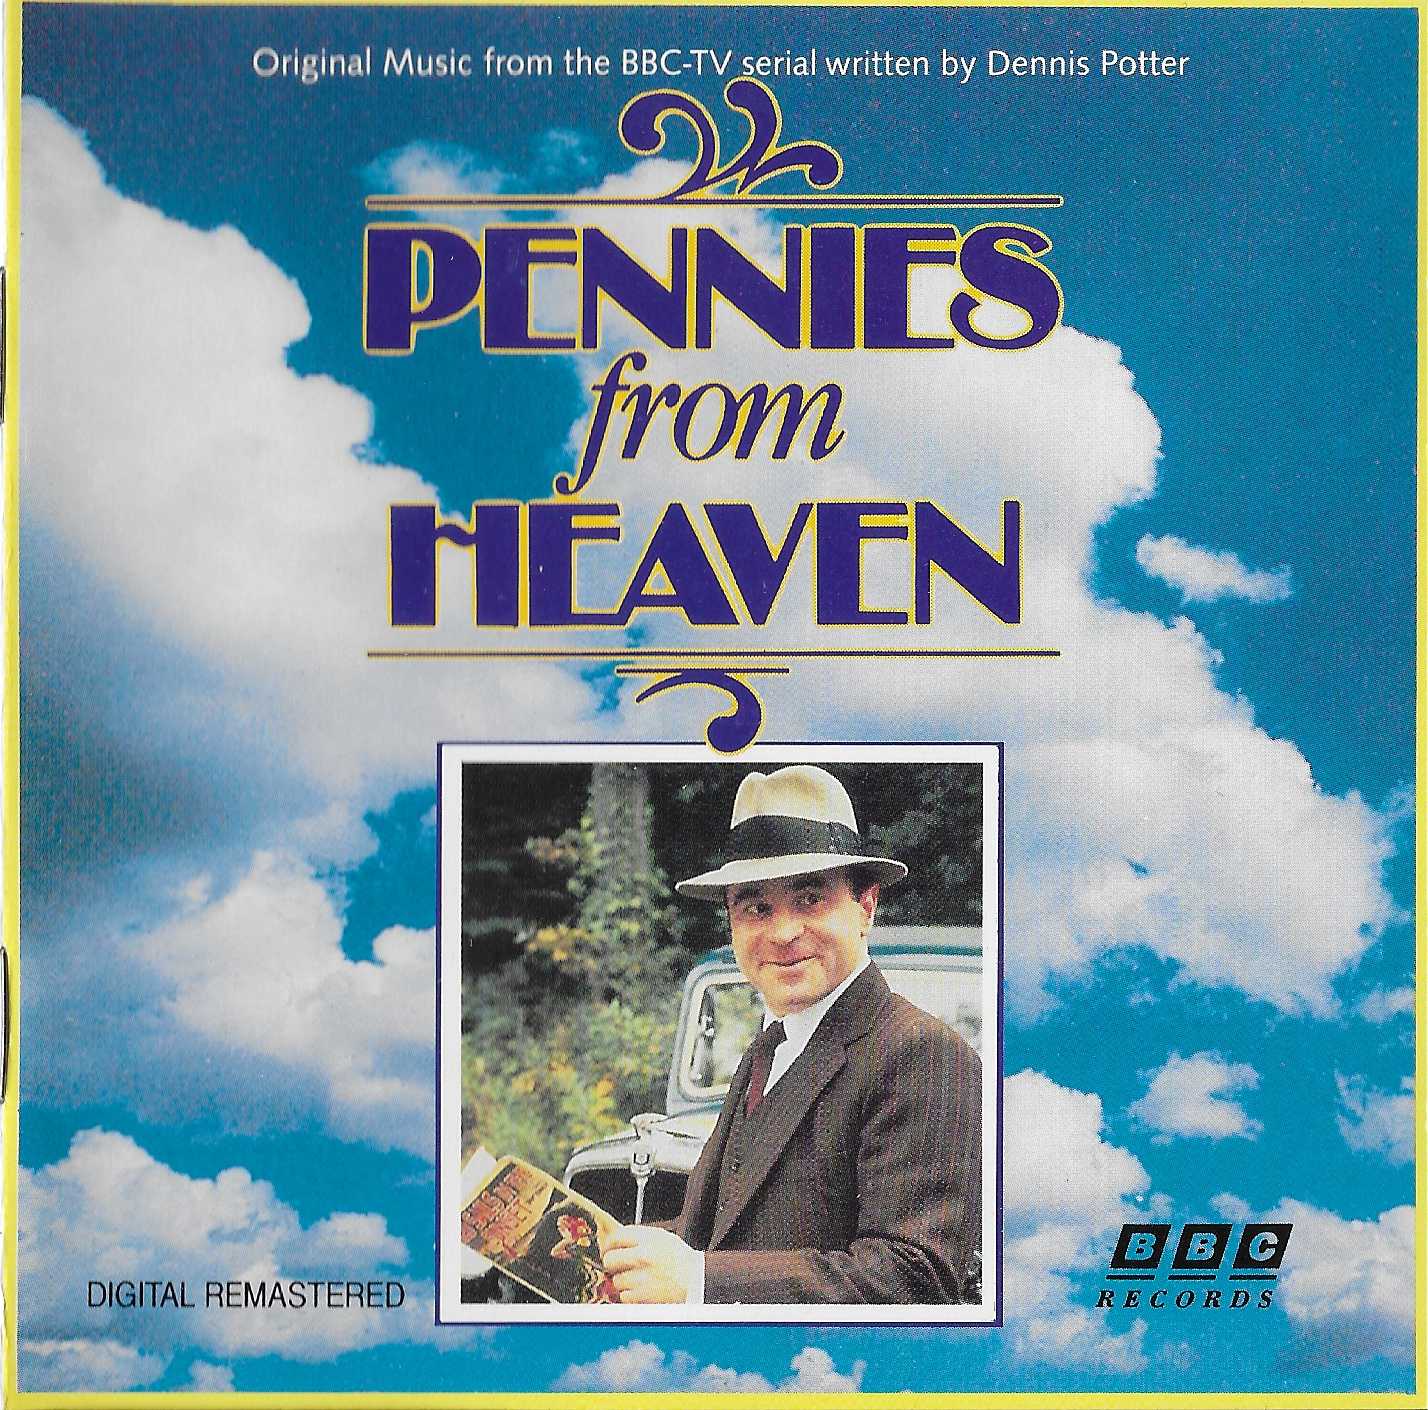 Picture of BBCCD7791 Pennies from Heaven - Dutch import by artist Various from the BBC cds - Records and Tapes library